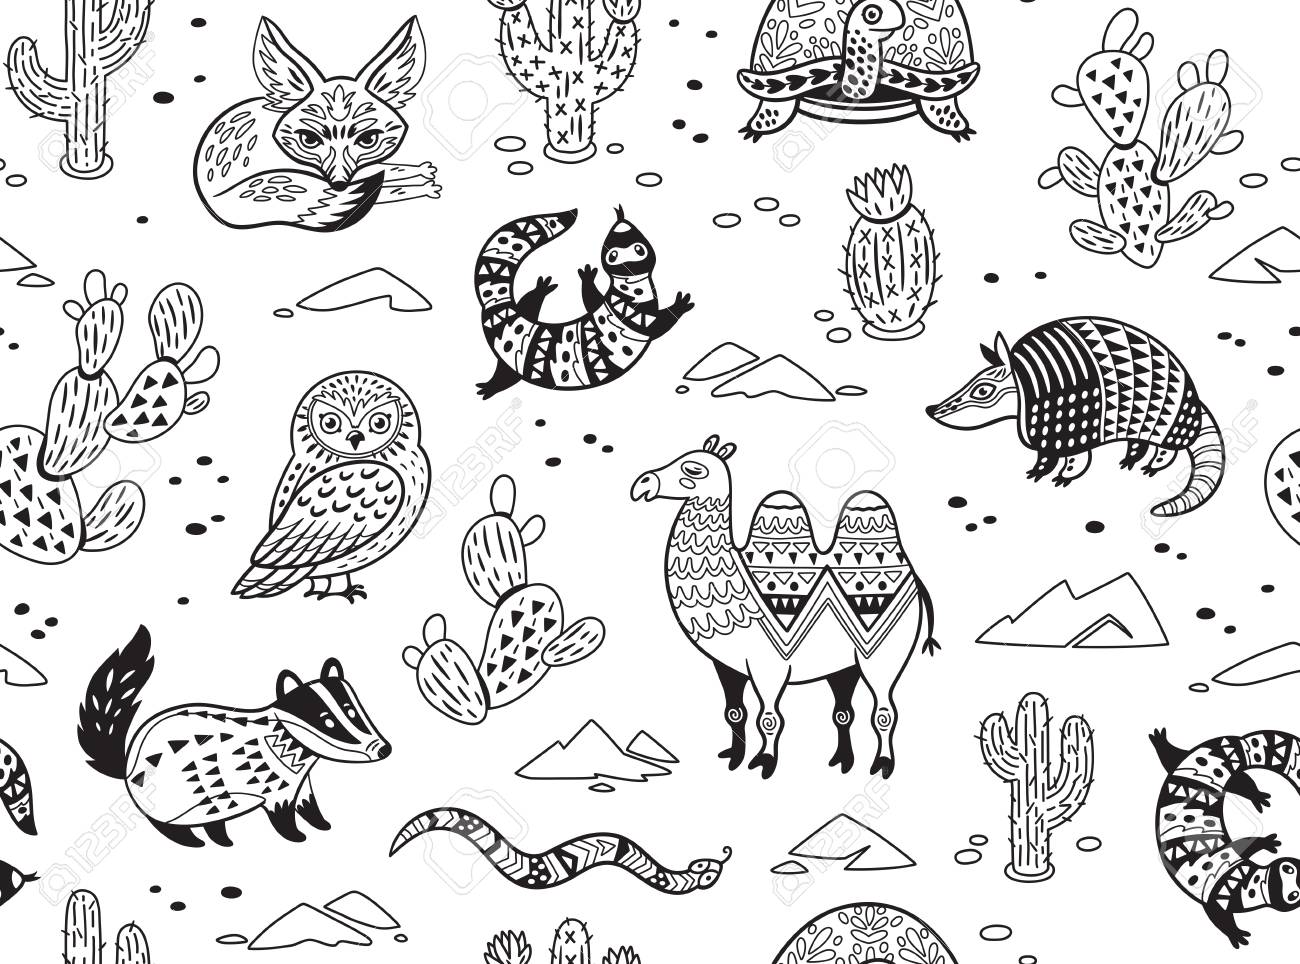 Outline seamless pattern of desert animals with ethnic tribal ornaments vector ornamental illustration in ethnic tribal style for children coloring pages royalty free svg cliparts vectors and stock illustration image